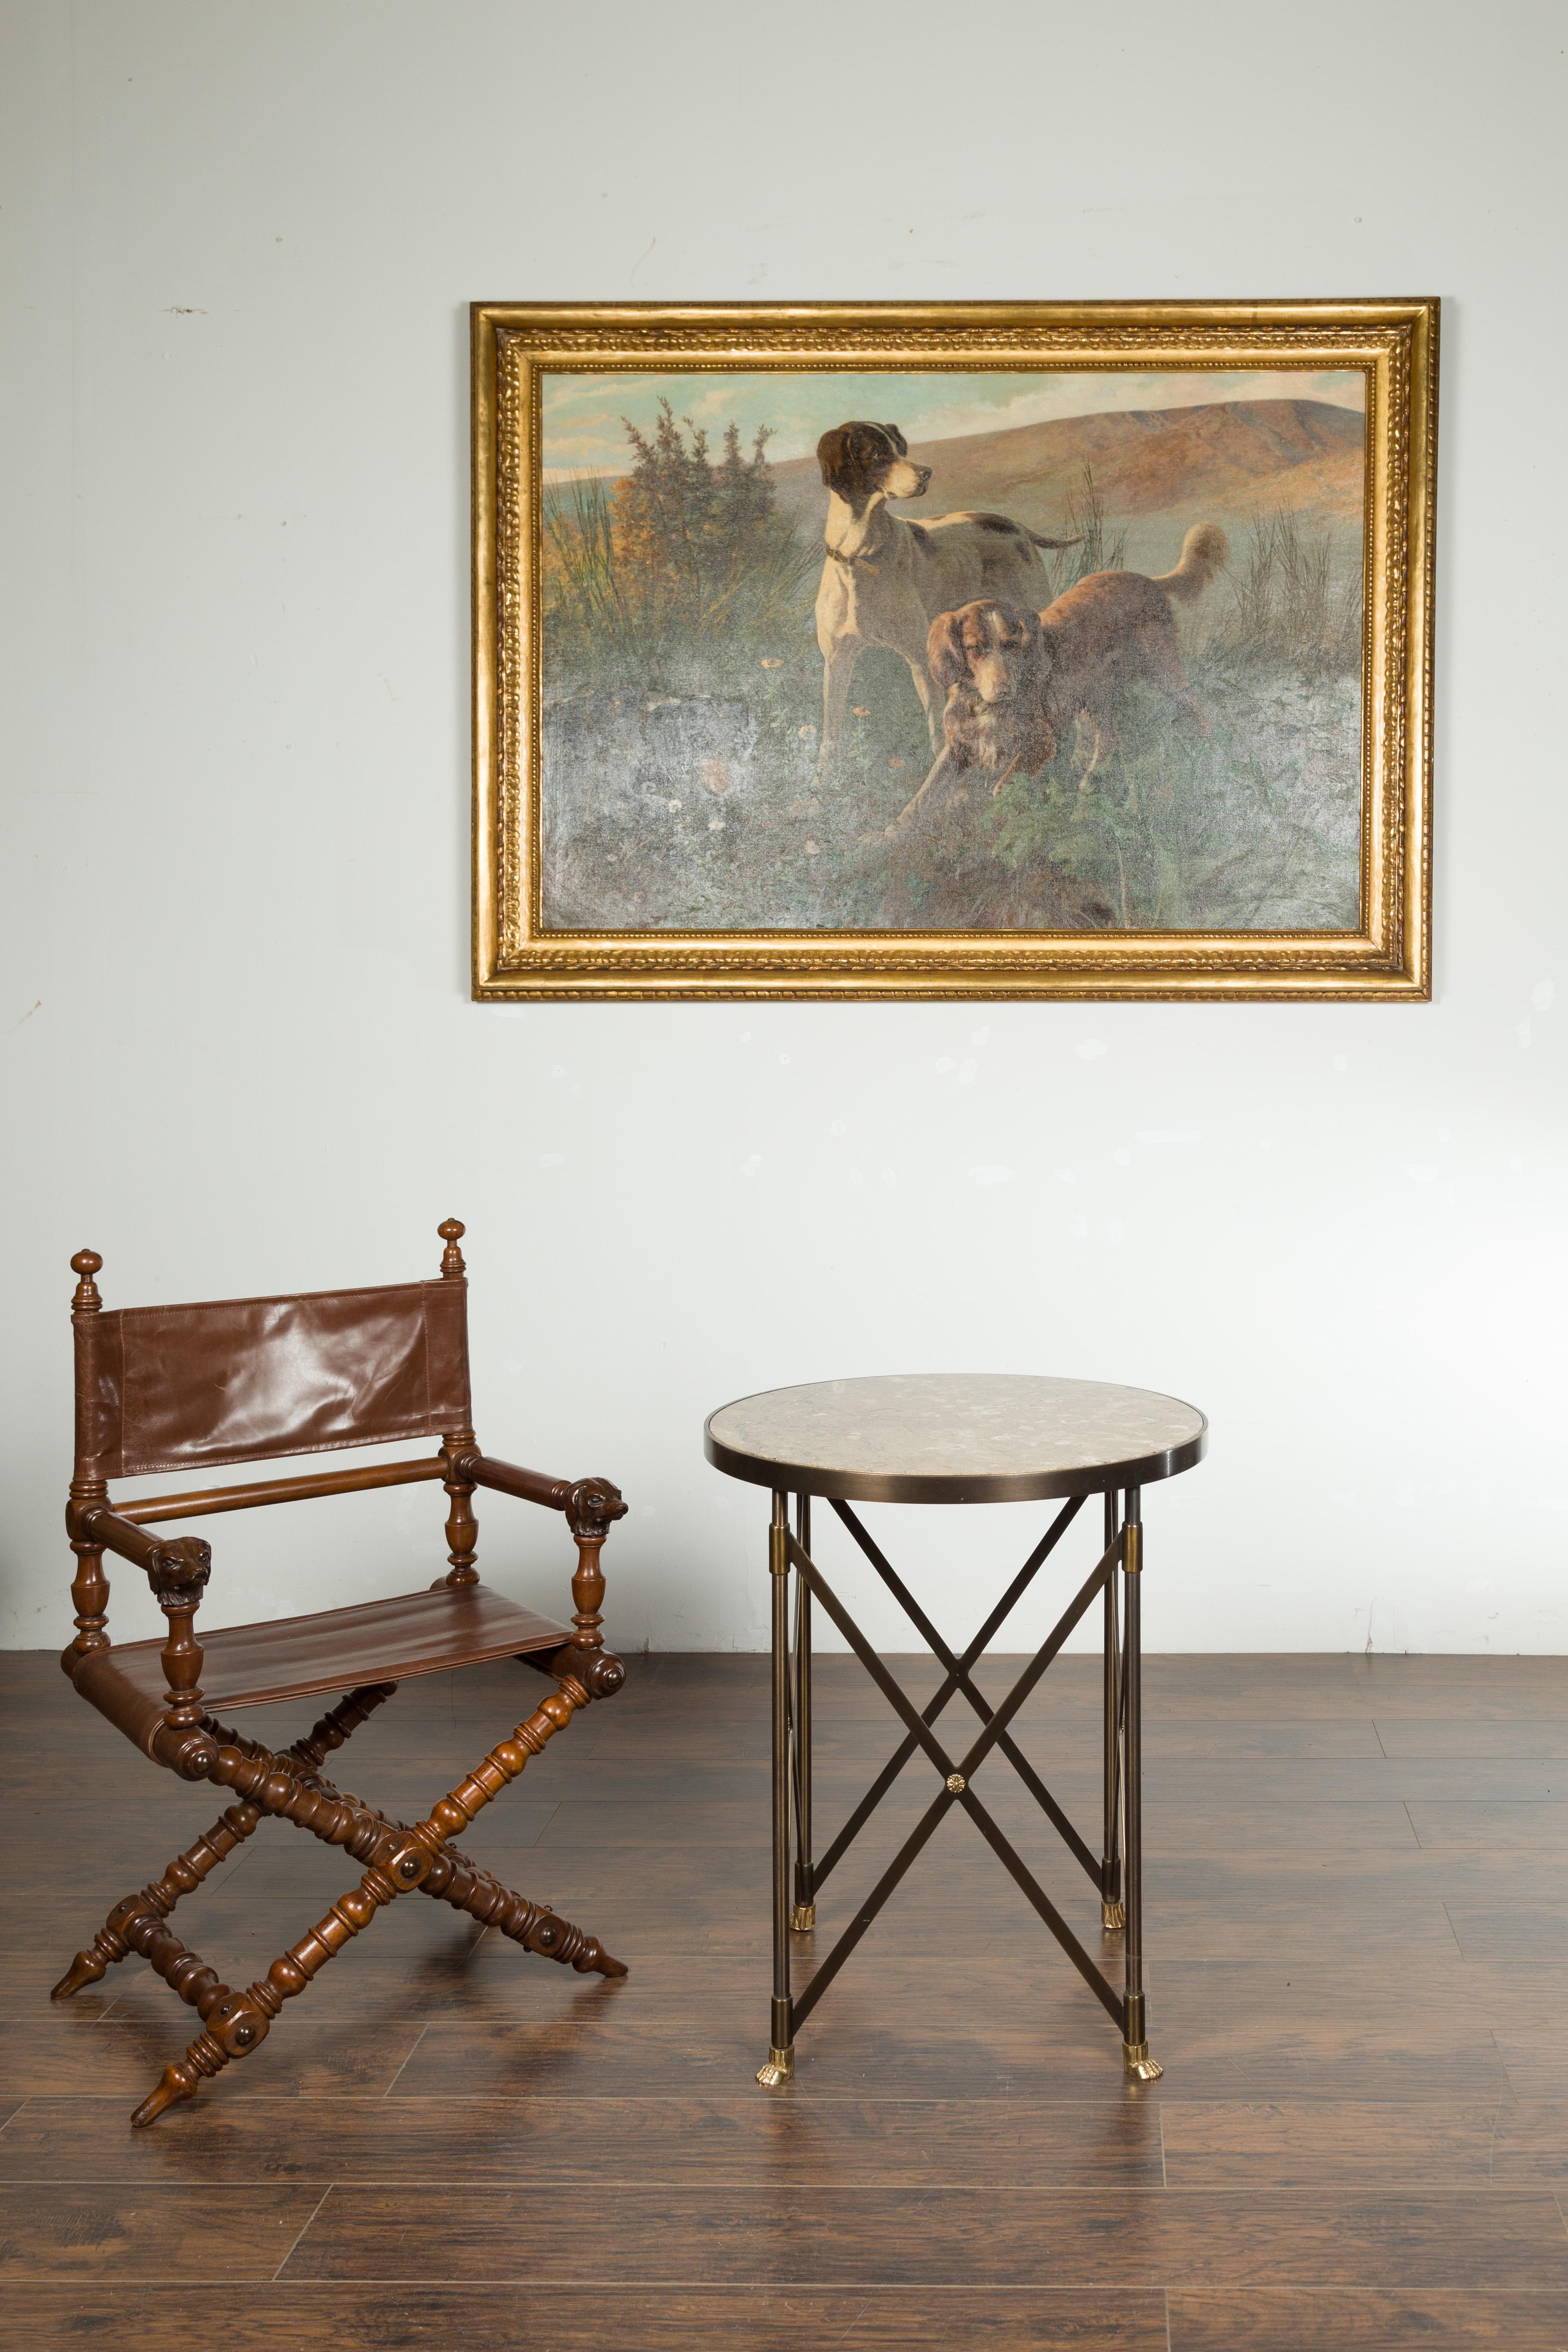 An Italian vintage bronze side table from the mid 20th century, with variegated marble top and paw feet. Created in Italy during the midcentury period, this side table features a circular marble top sitting above a bronze side table with X-form